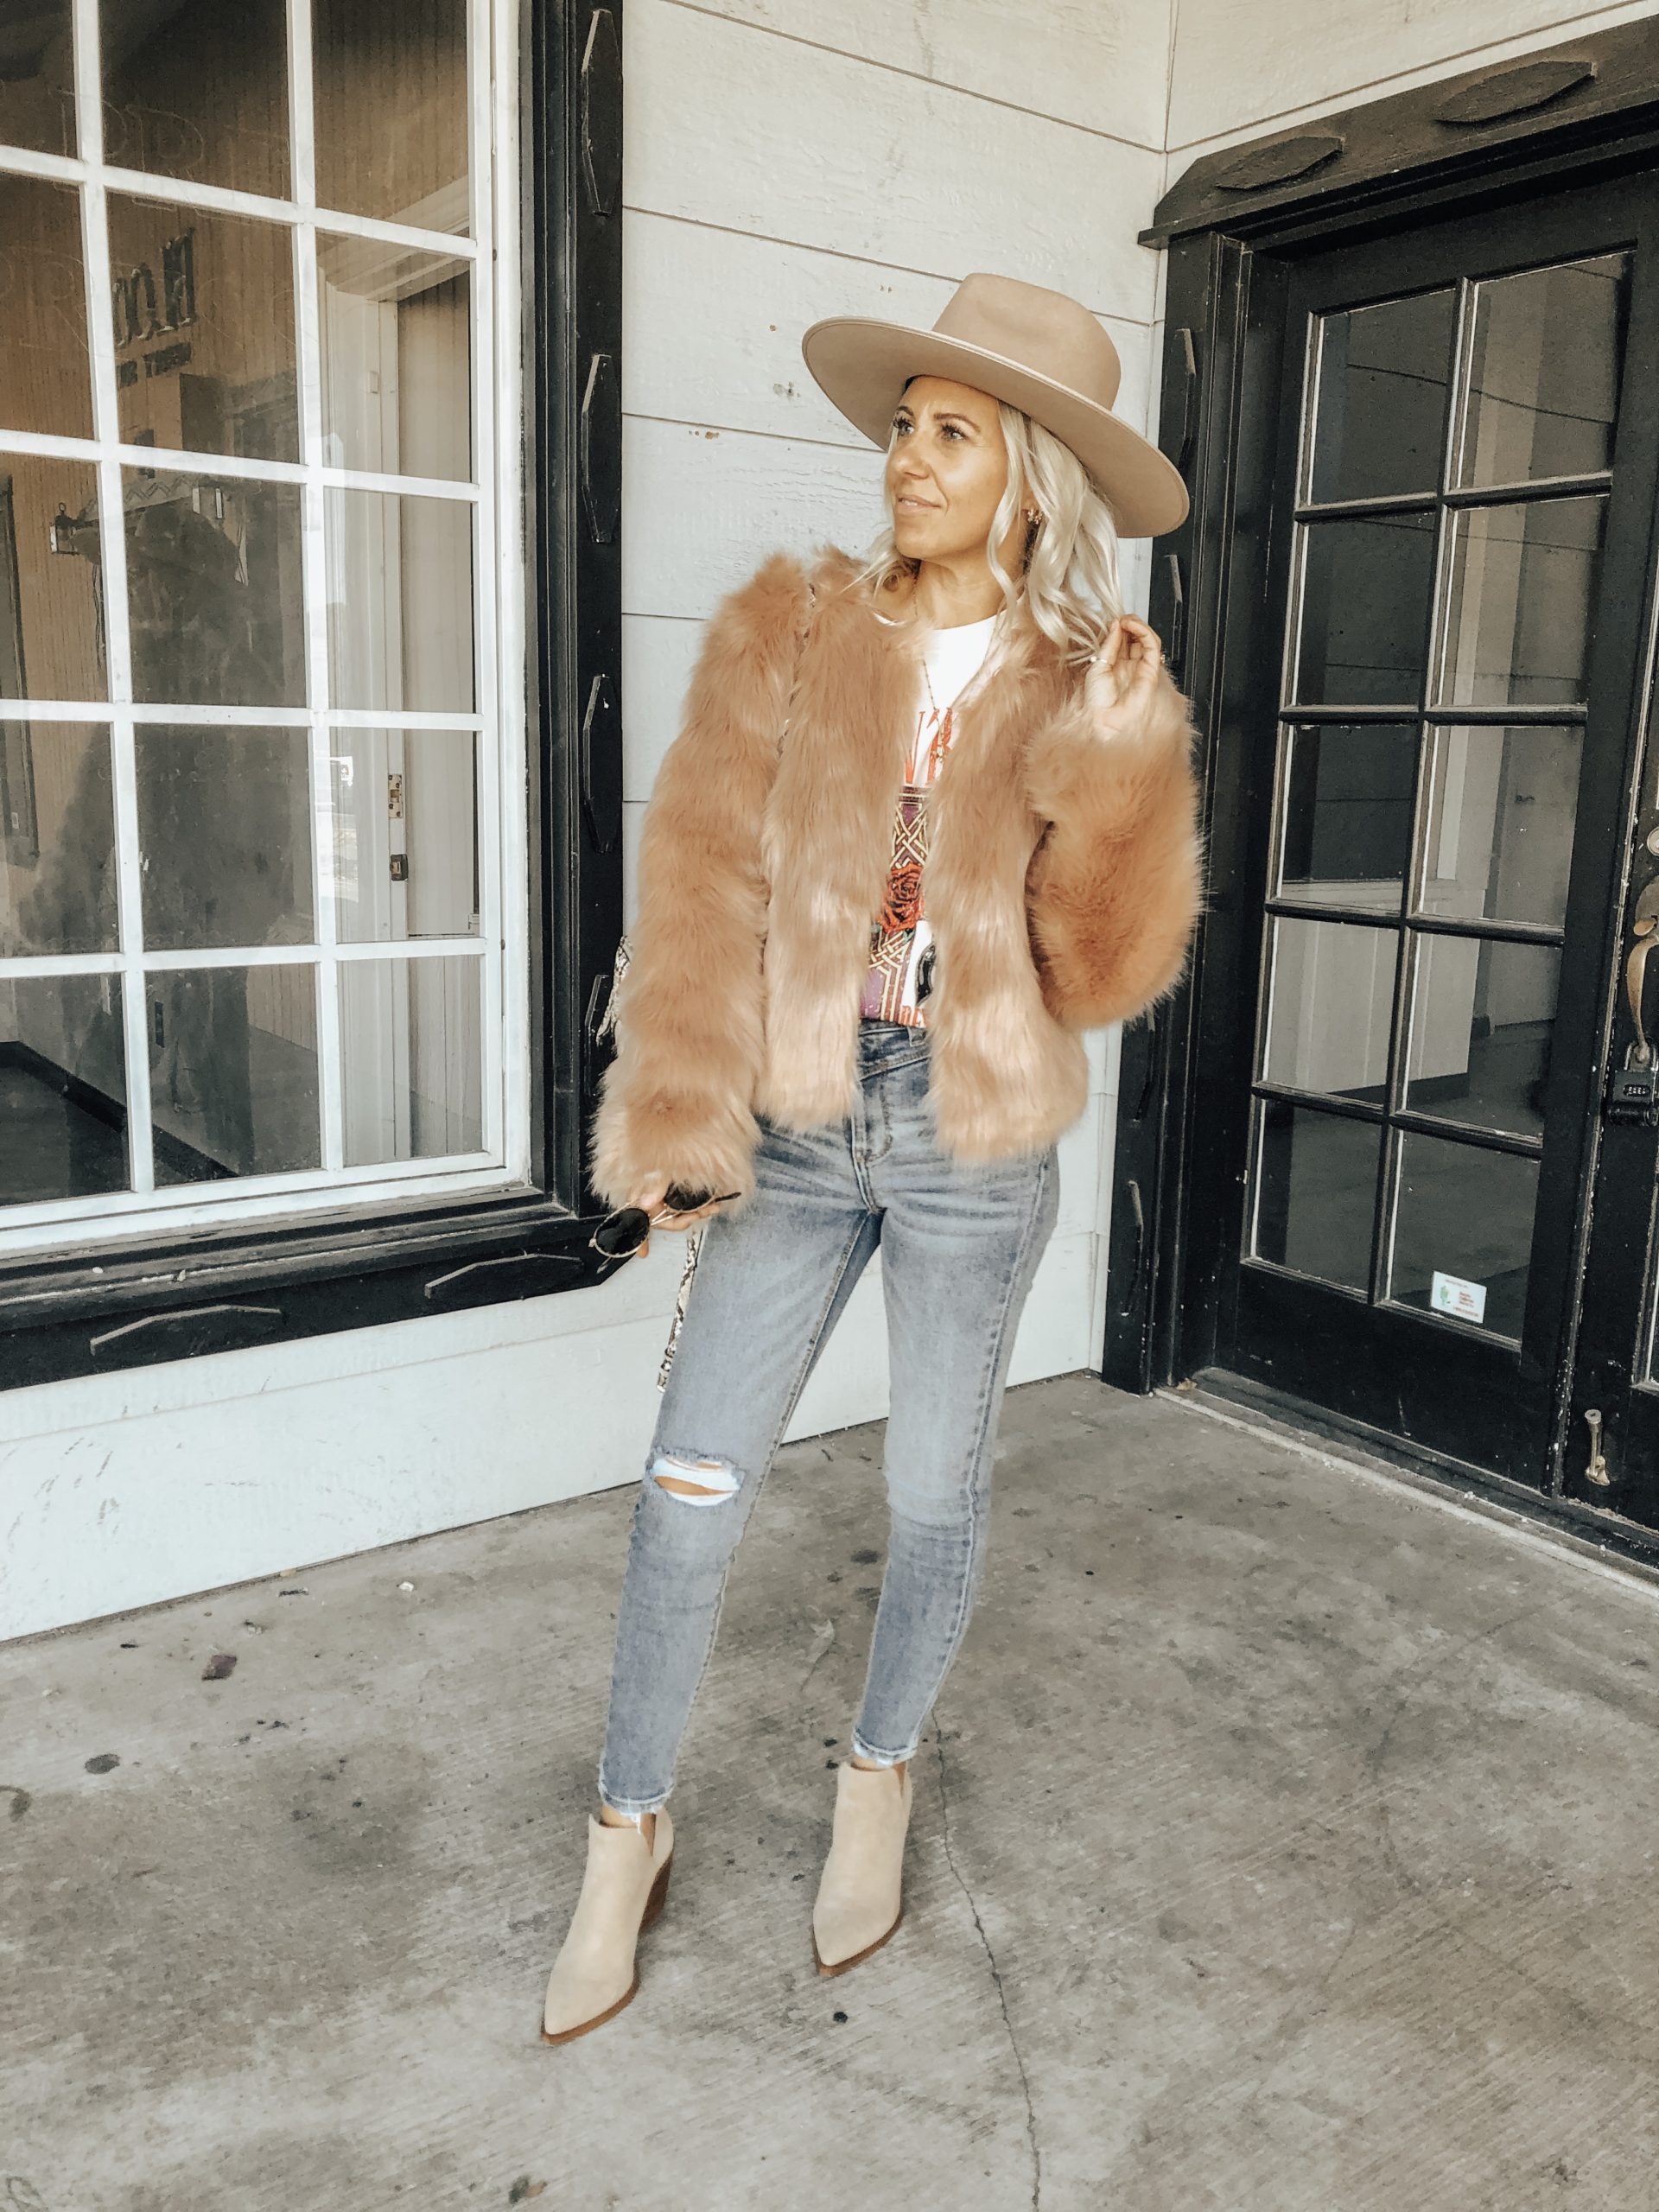 THE COZIEST FAUX FUR JACKETS + COATS- Jaclyn De Leon Style + Sharing the best of faux fur at great affordable price points. Throw it over a graphic tee + jeans or a plaid dress for a dressier look